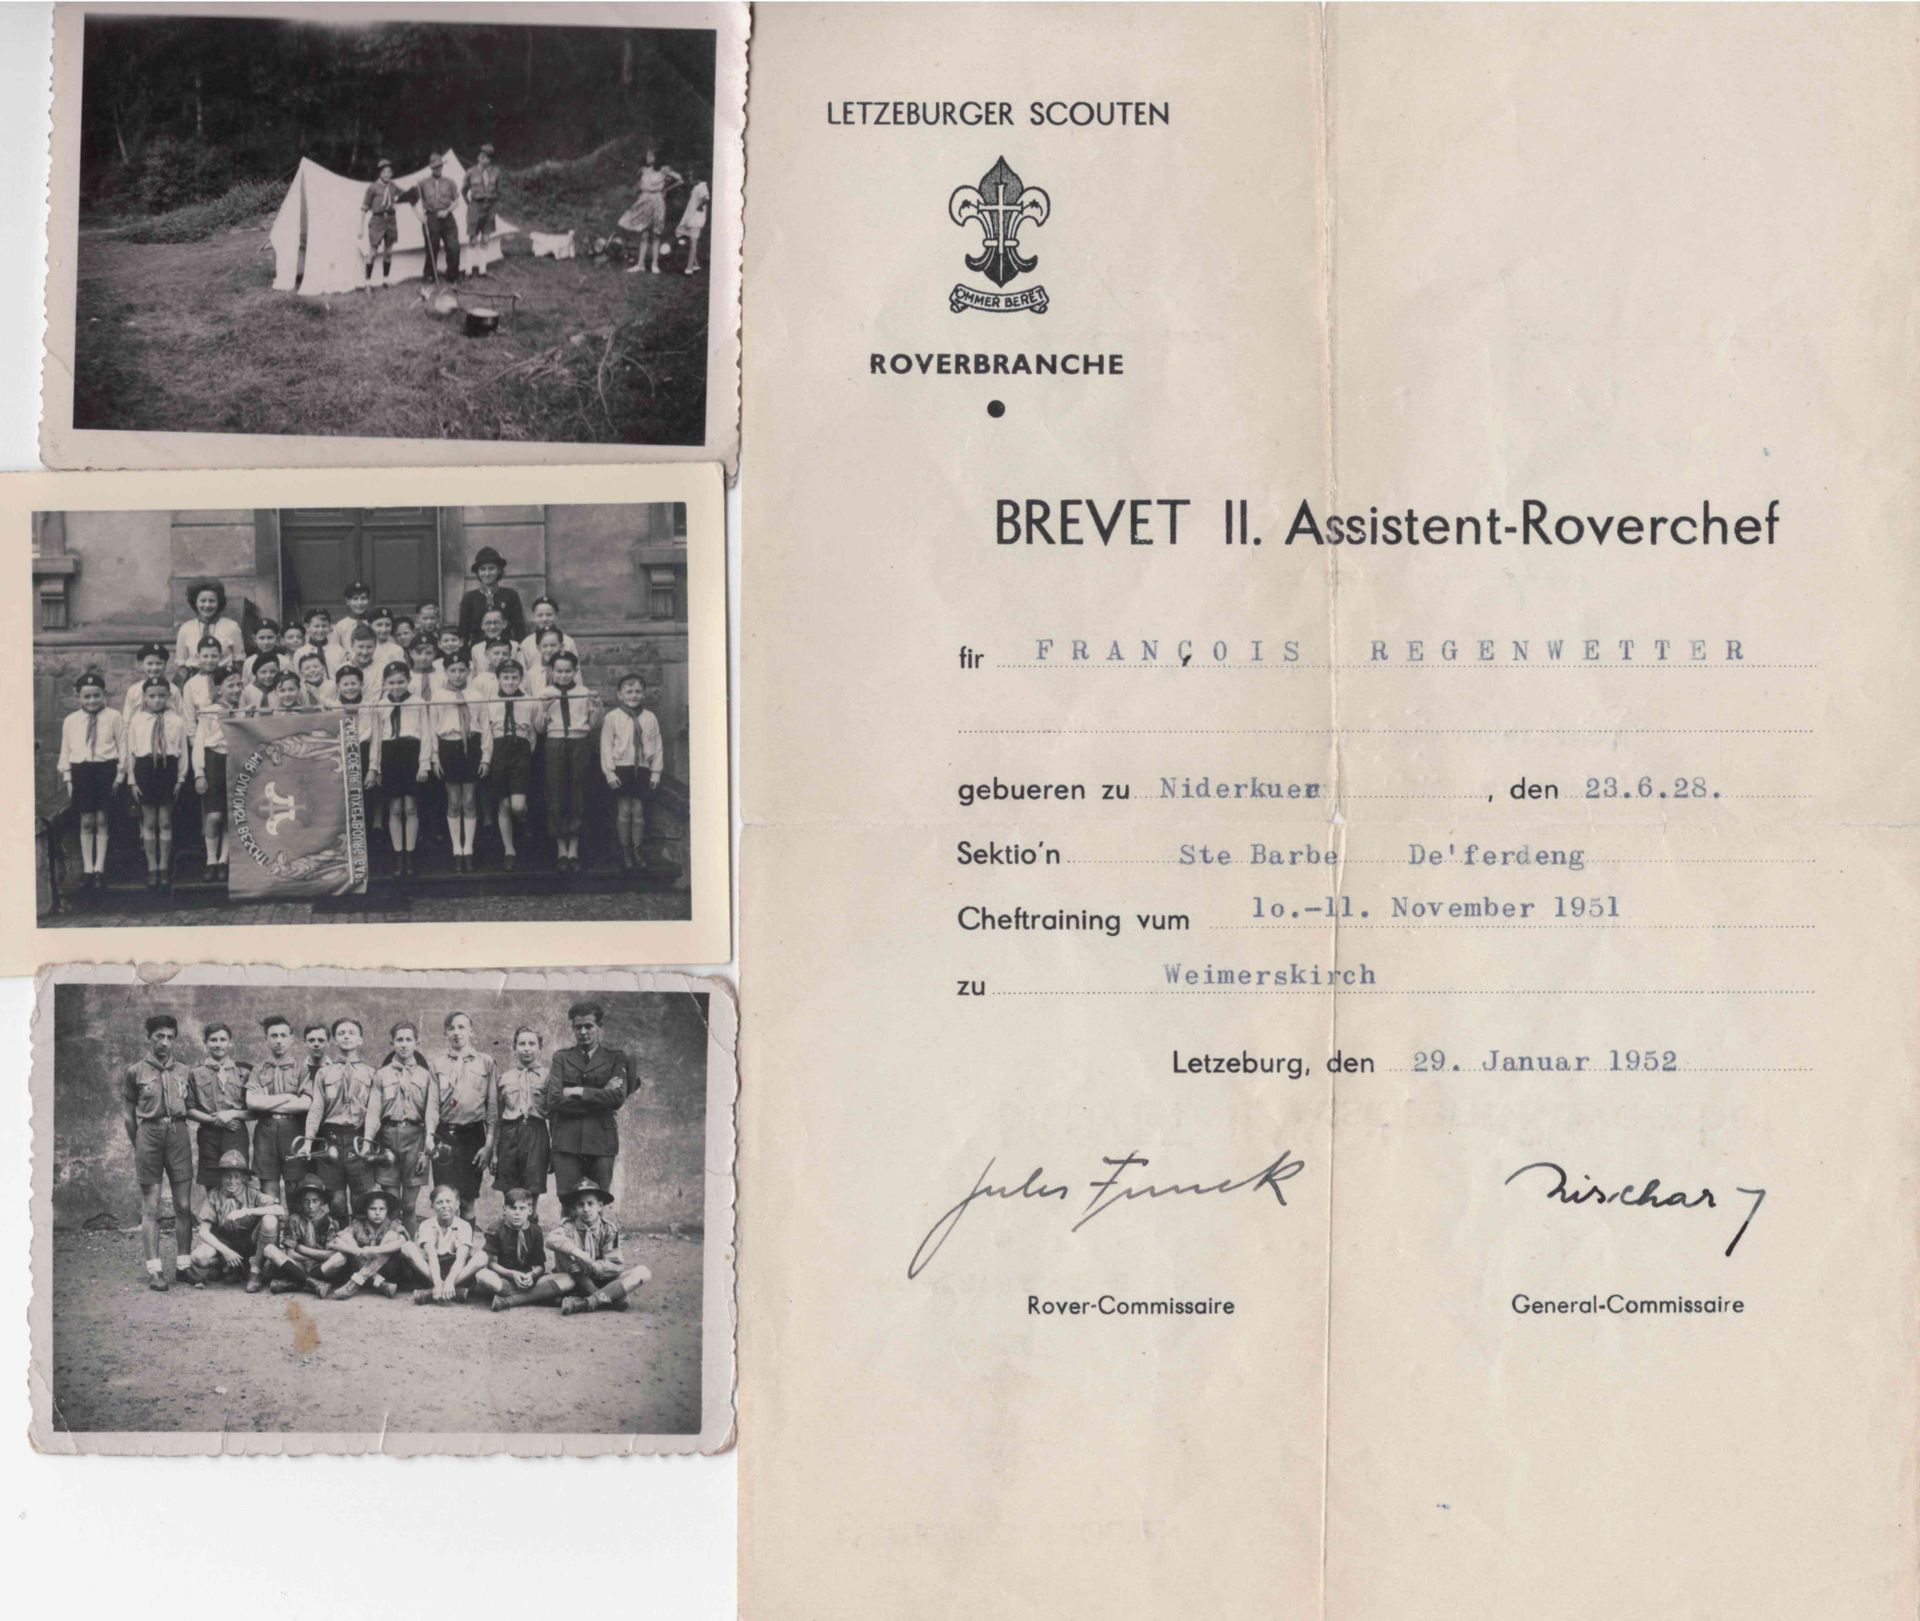 Null (SCOUT) Reunion of 9 photographs of scouts (Bonnevoie) on parade or excursi&hellip;